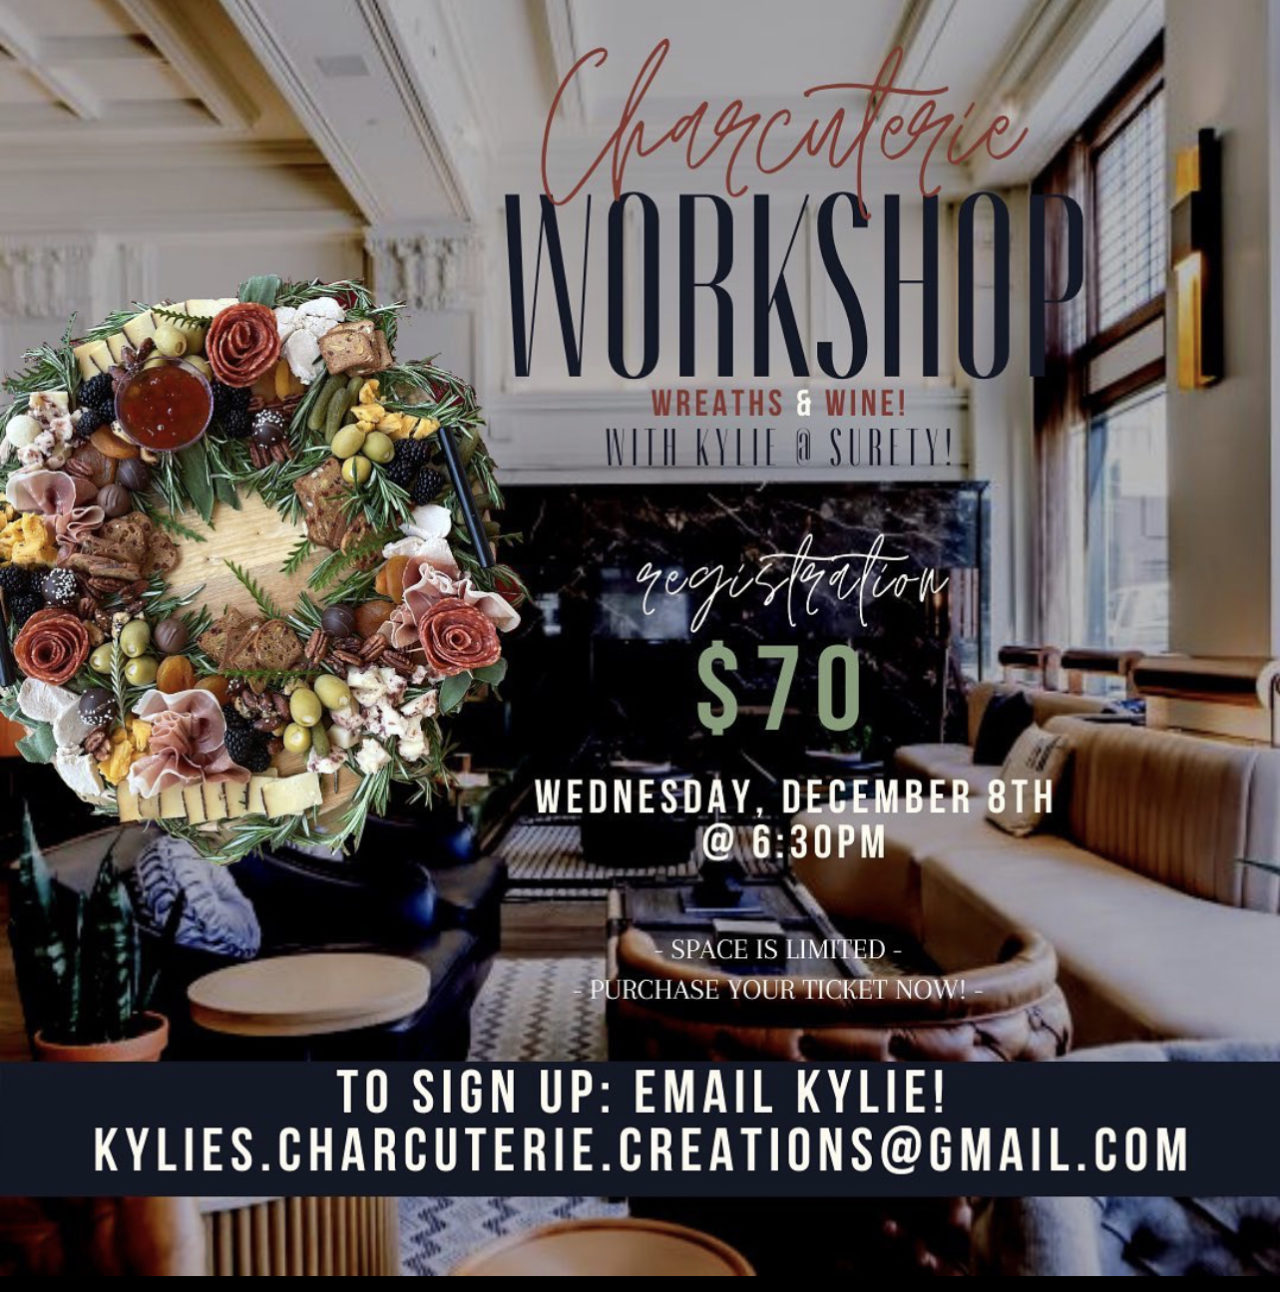 Wreath & Wine Workshop flyer hosted by our Des Moines hotel